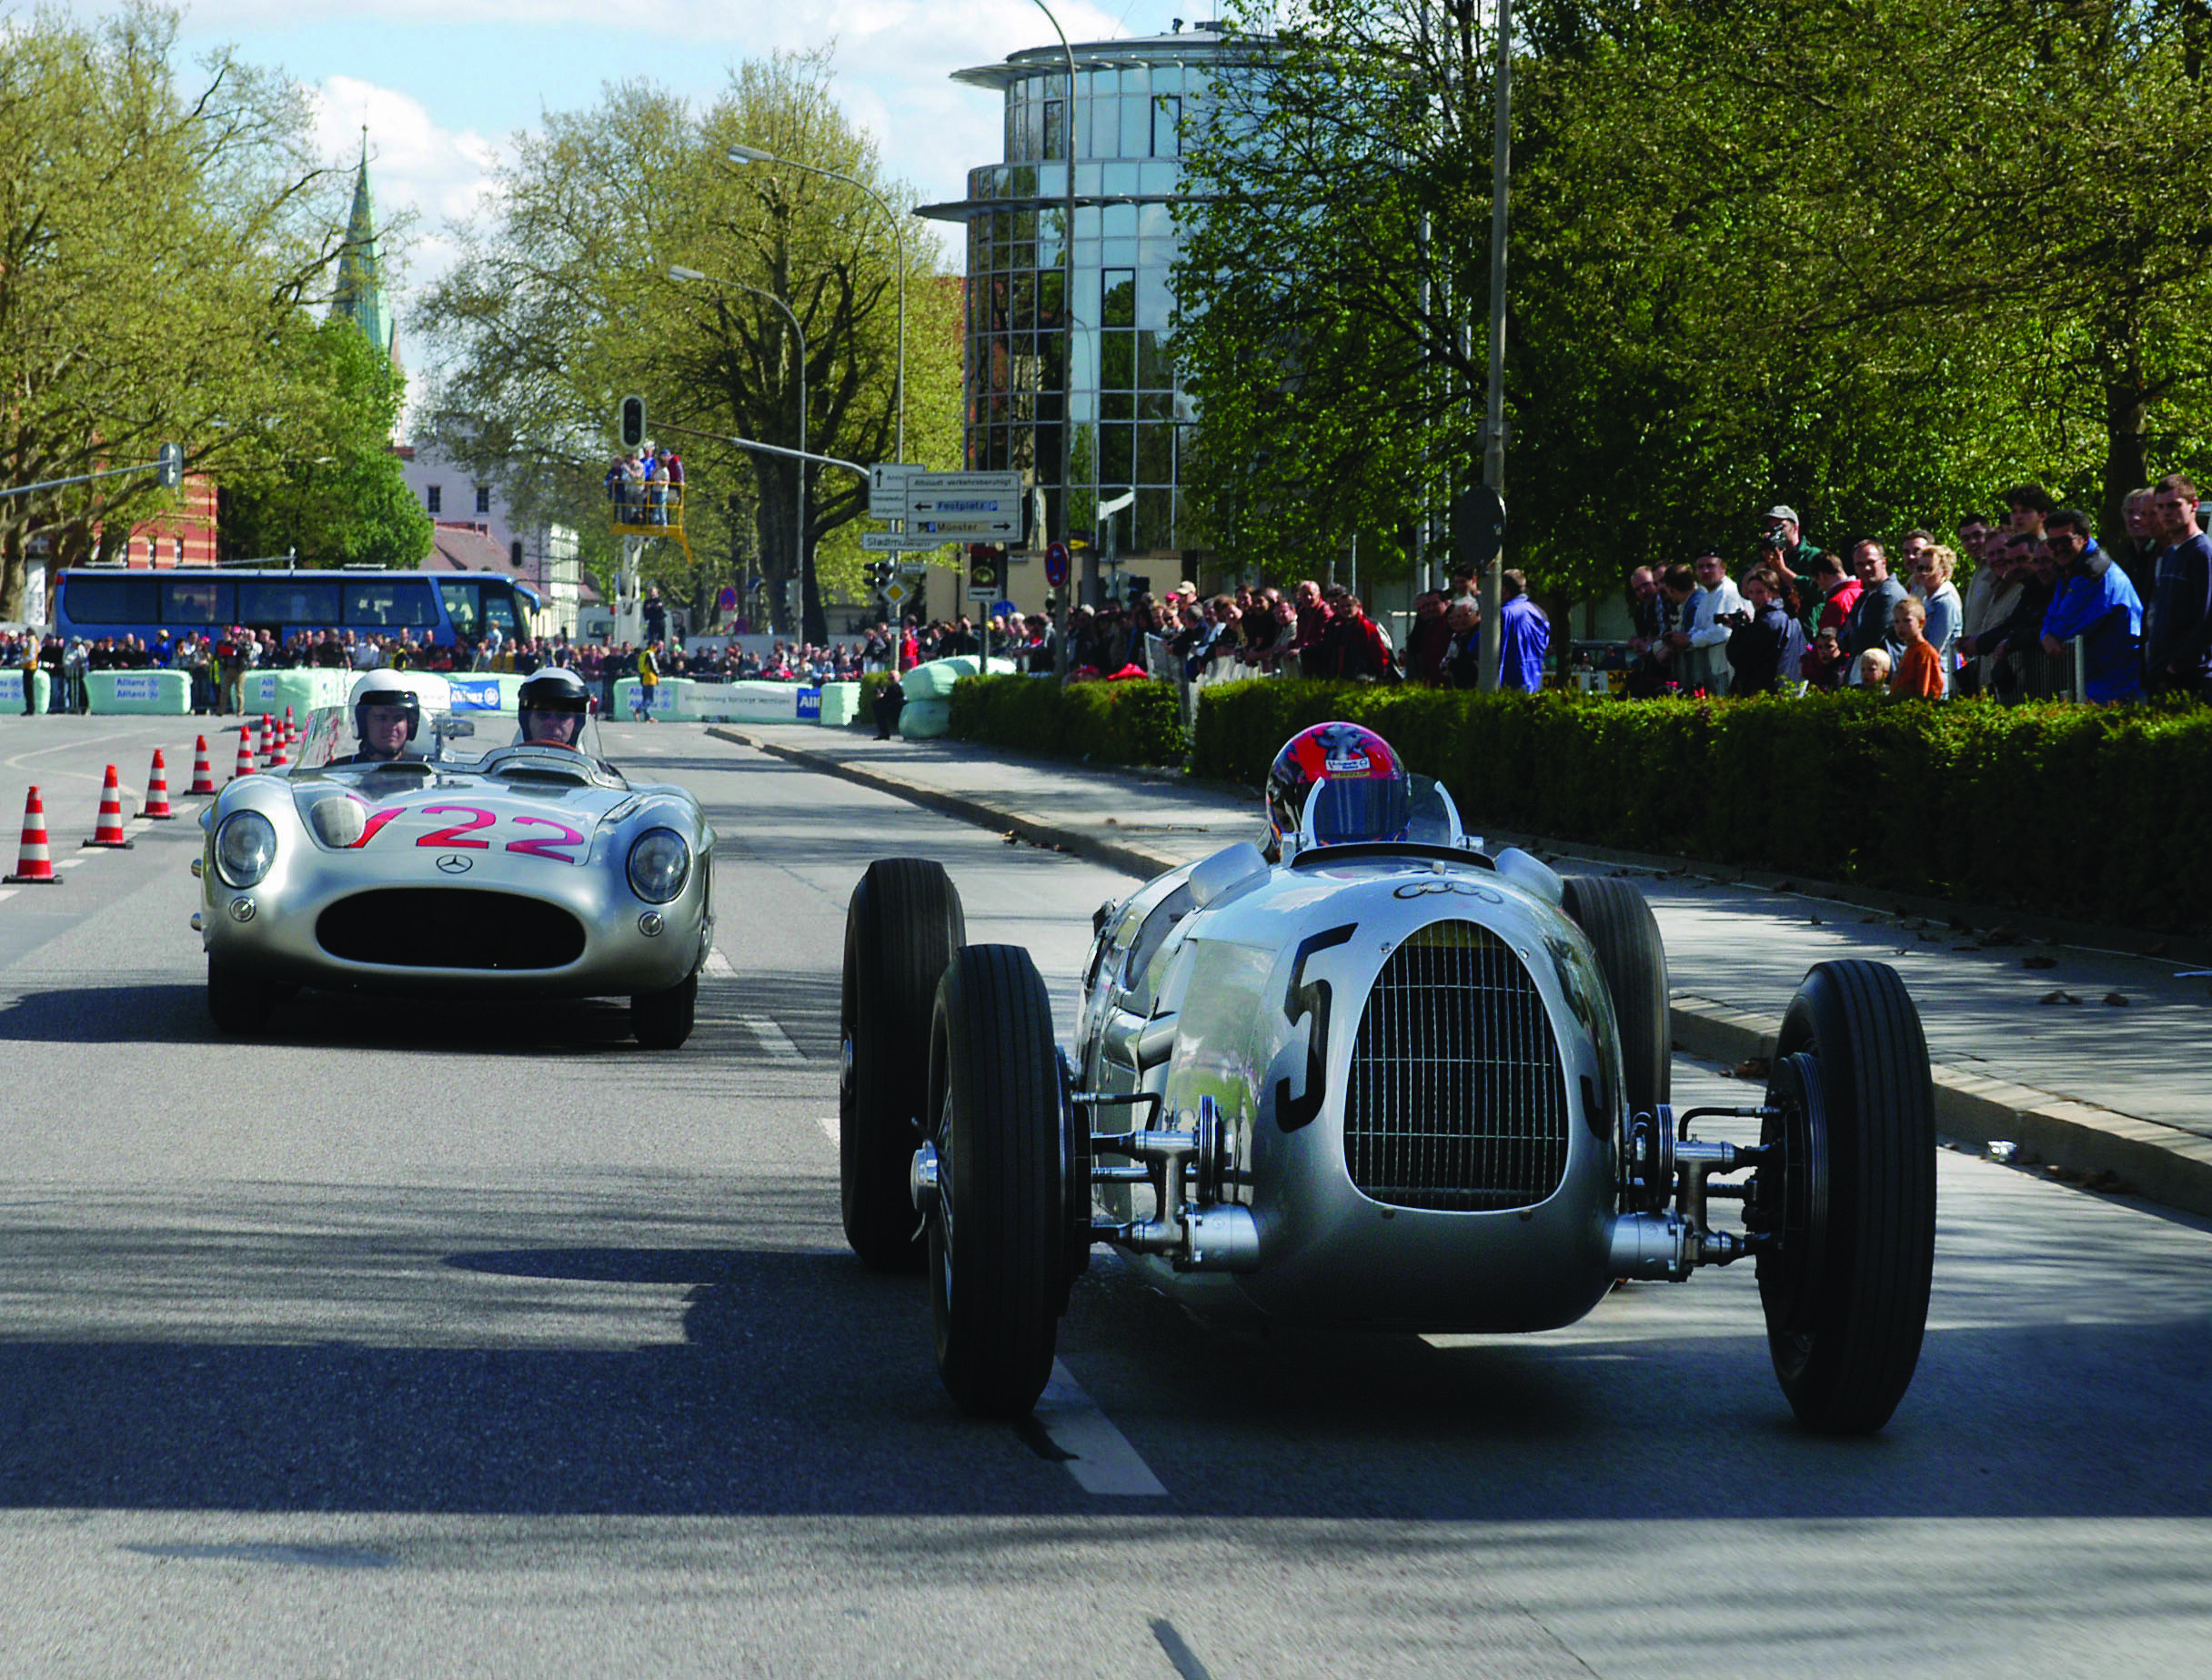 Attractions at the Donau Ring 2003: Apart from the legendary Auto Union race car Type C from 1936 (right) also the Mille Miglia winner from 1955, a Mercedes 300 SLR, drove the 1.6-kilometre course around the old part of the city of Ingolstadt. Daimler-Chrysler Classic took part at the Donau Ring for the first time, at the invitation of Audi Tradition